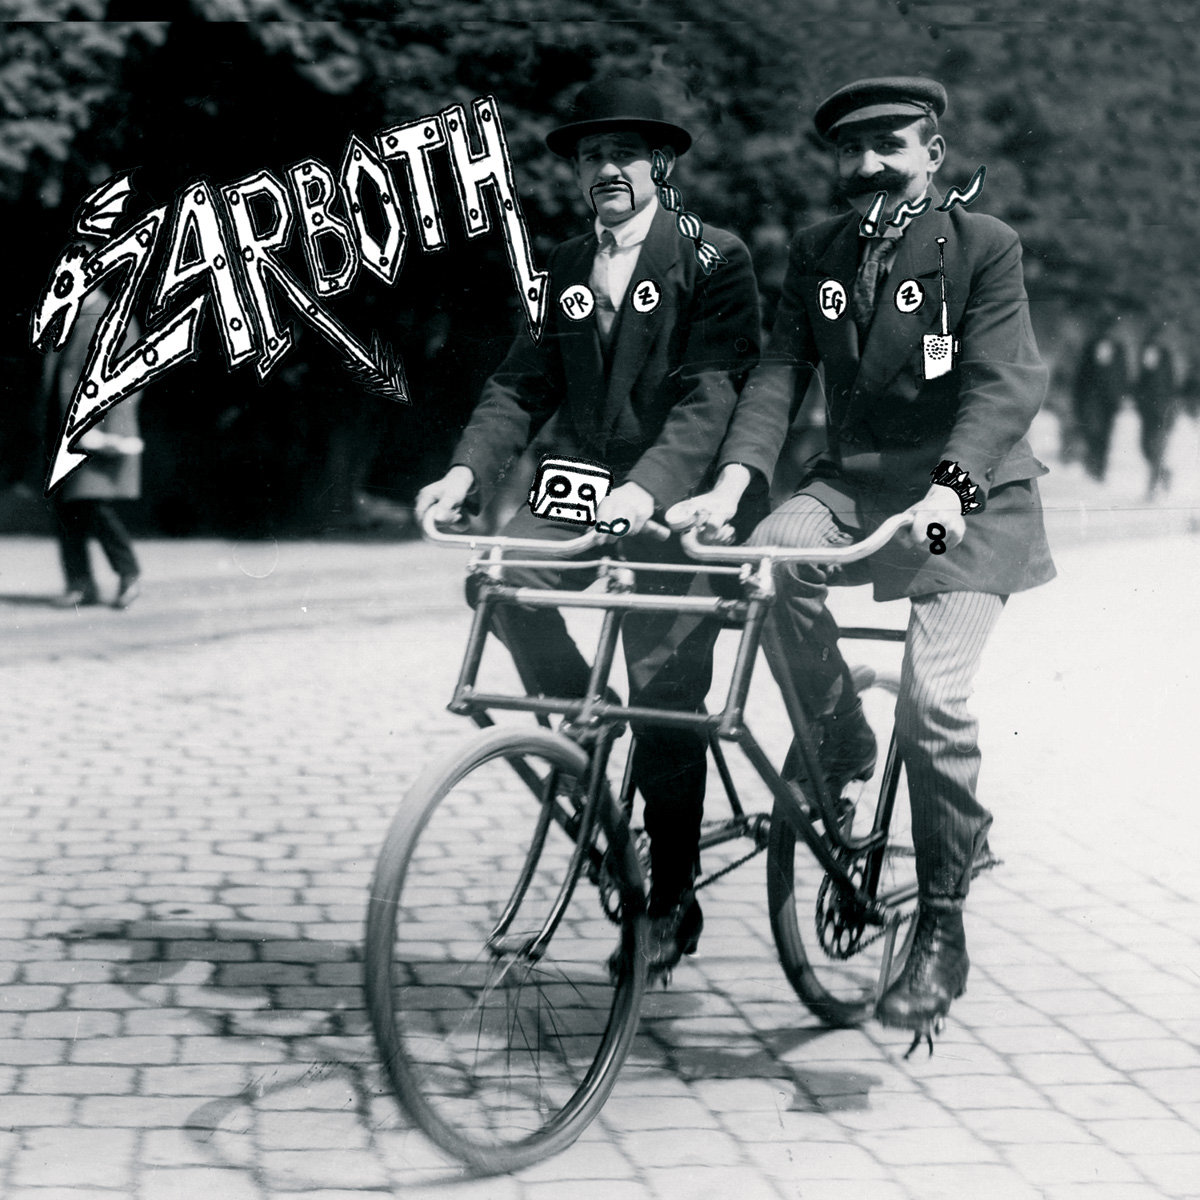 Zarboth self-titled